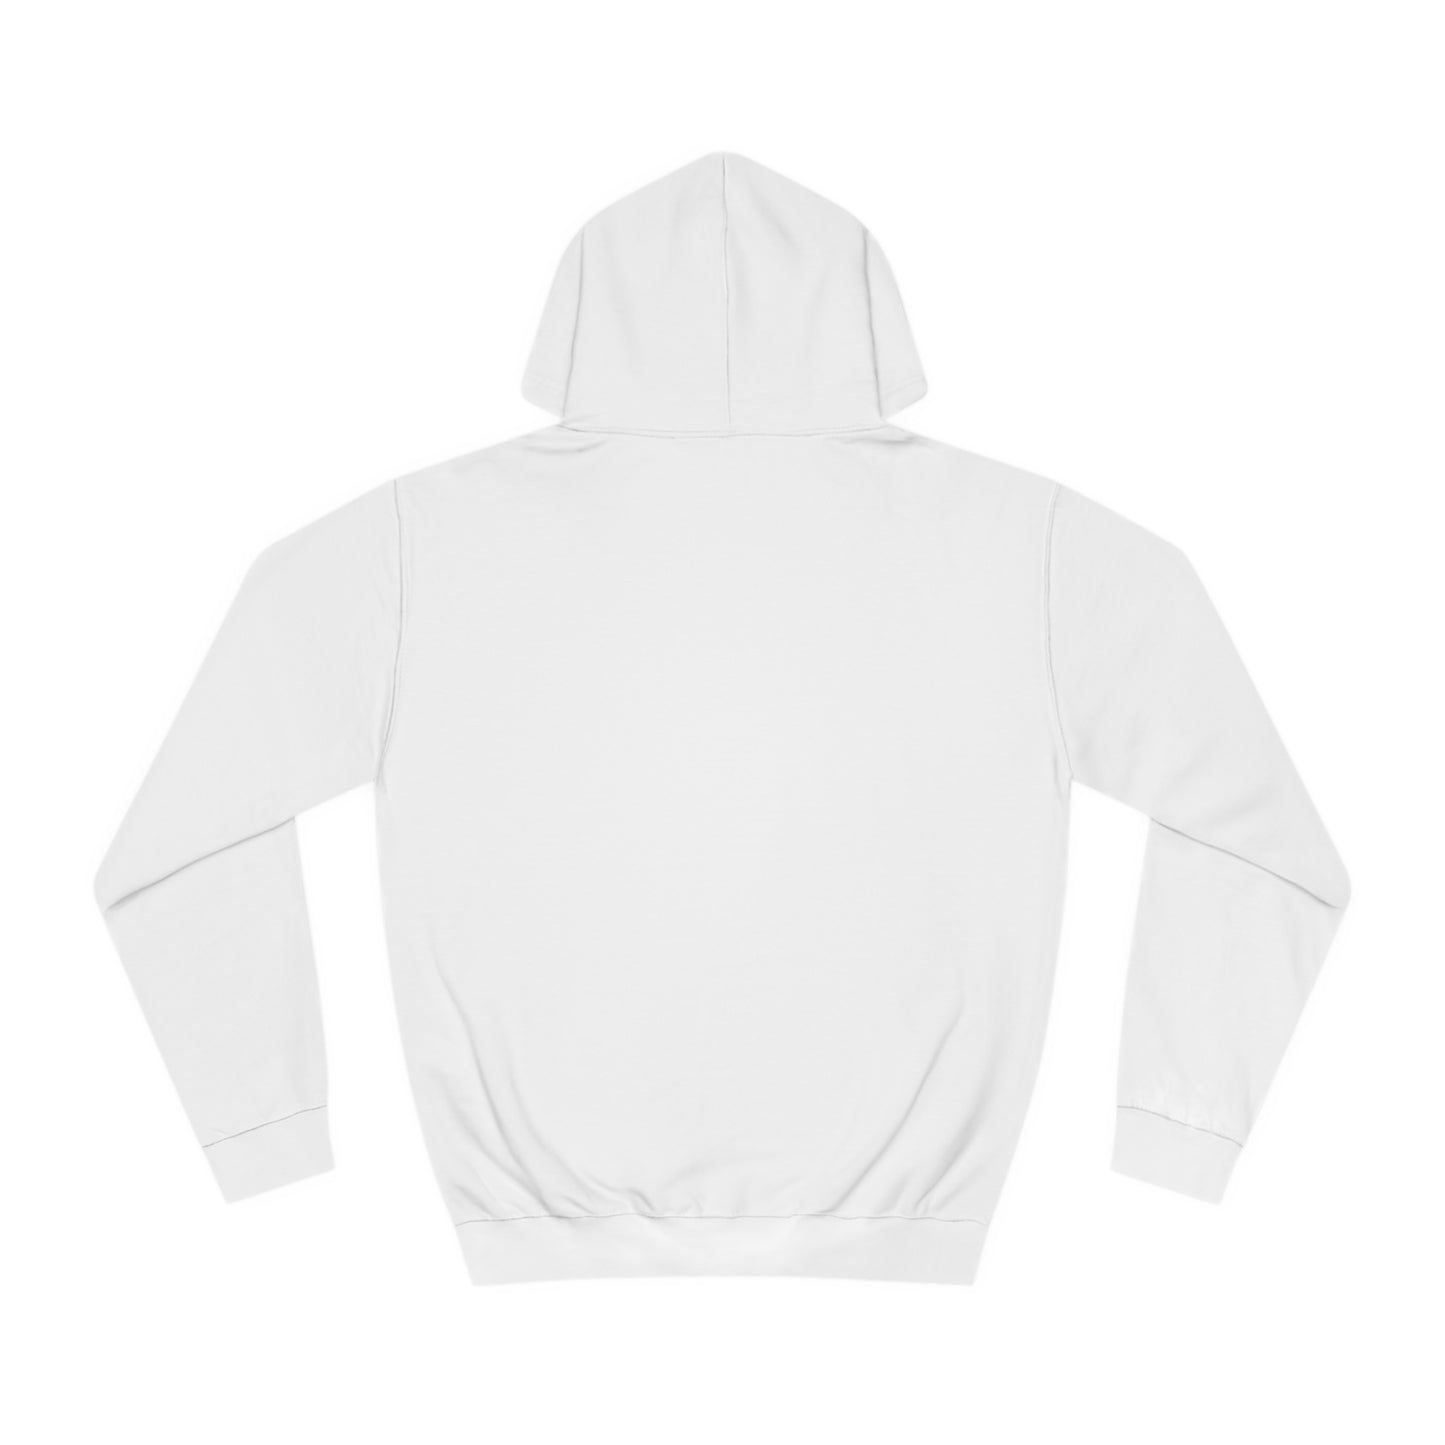 Sporting Fingal FC Unisex Heavy Blend Pullover Hoodie